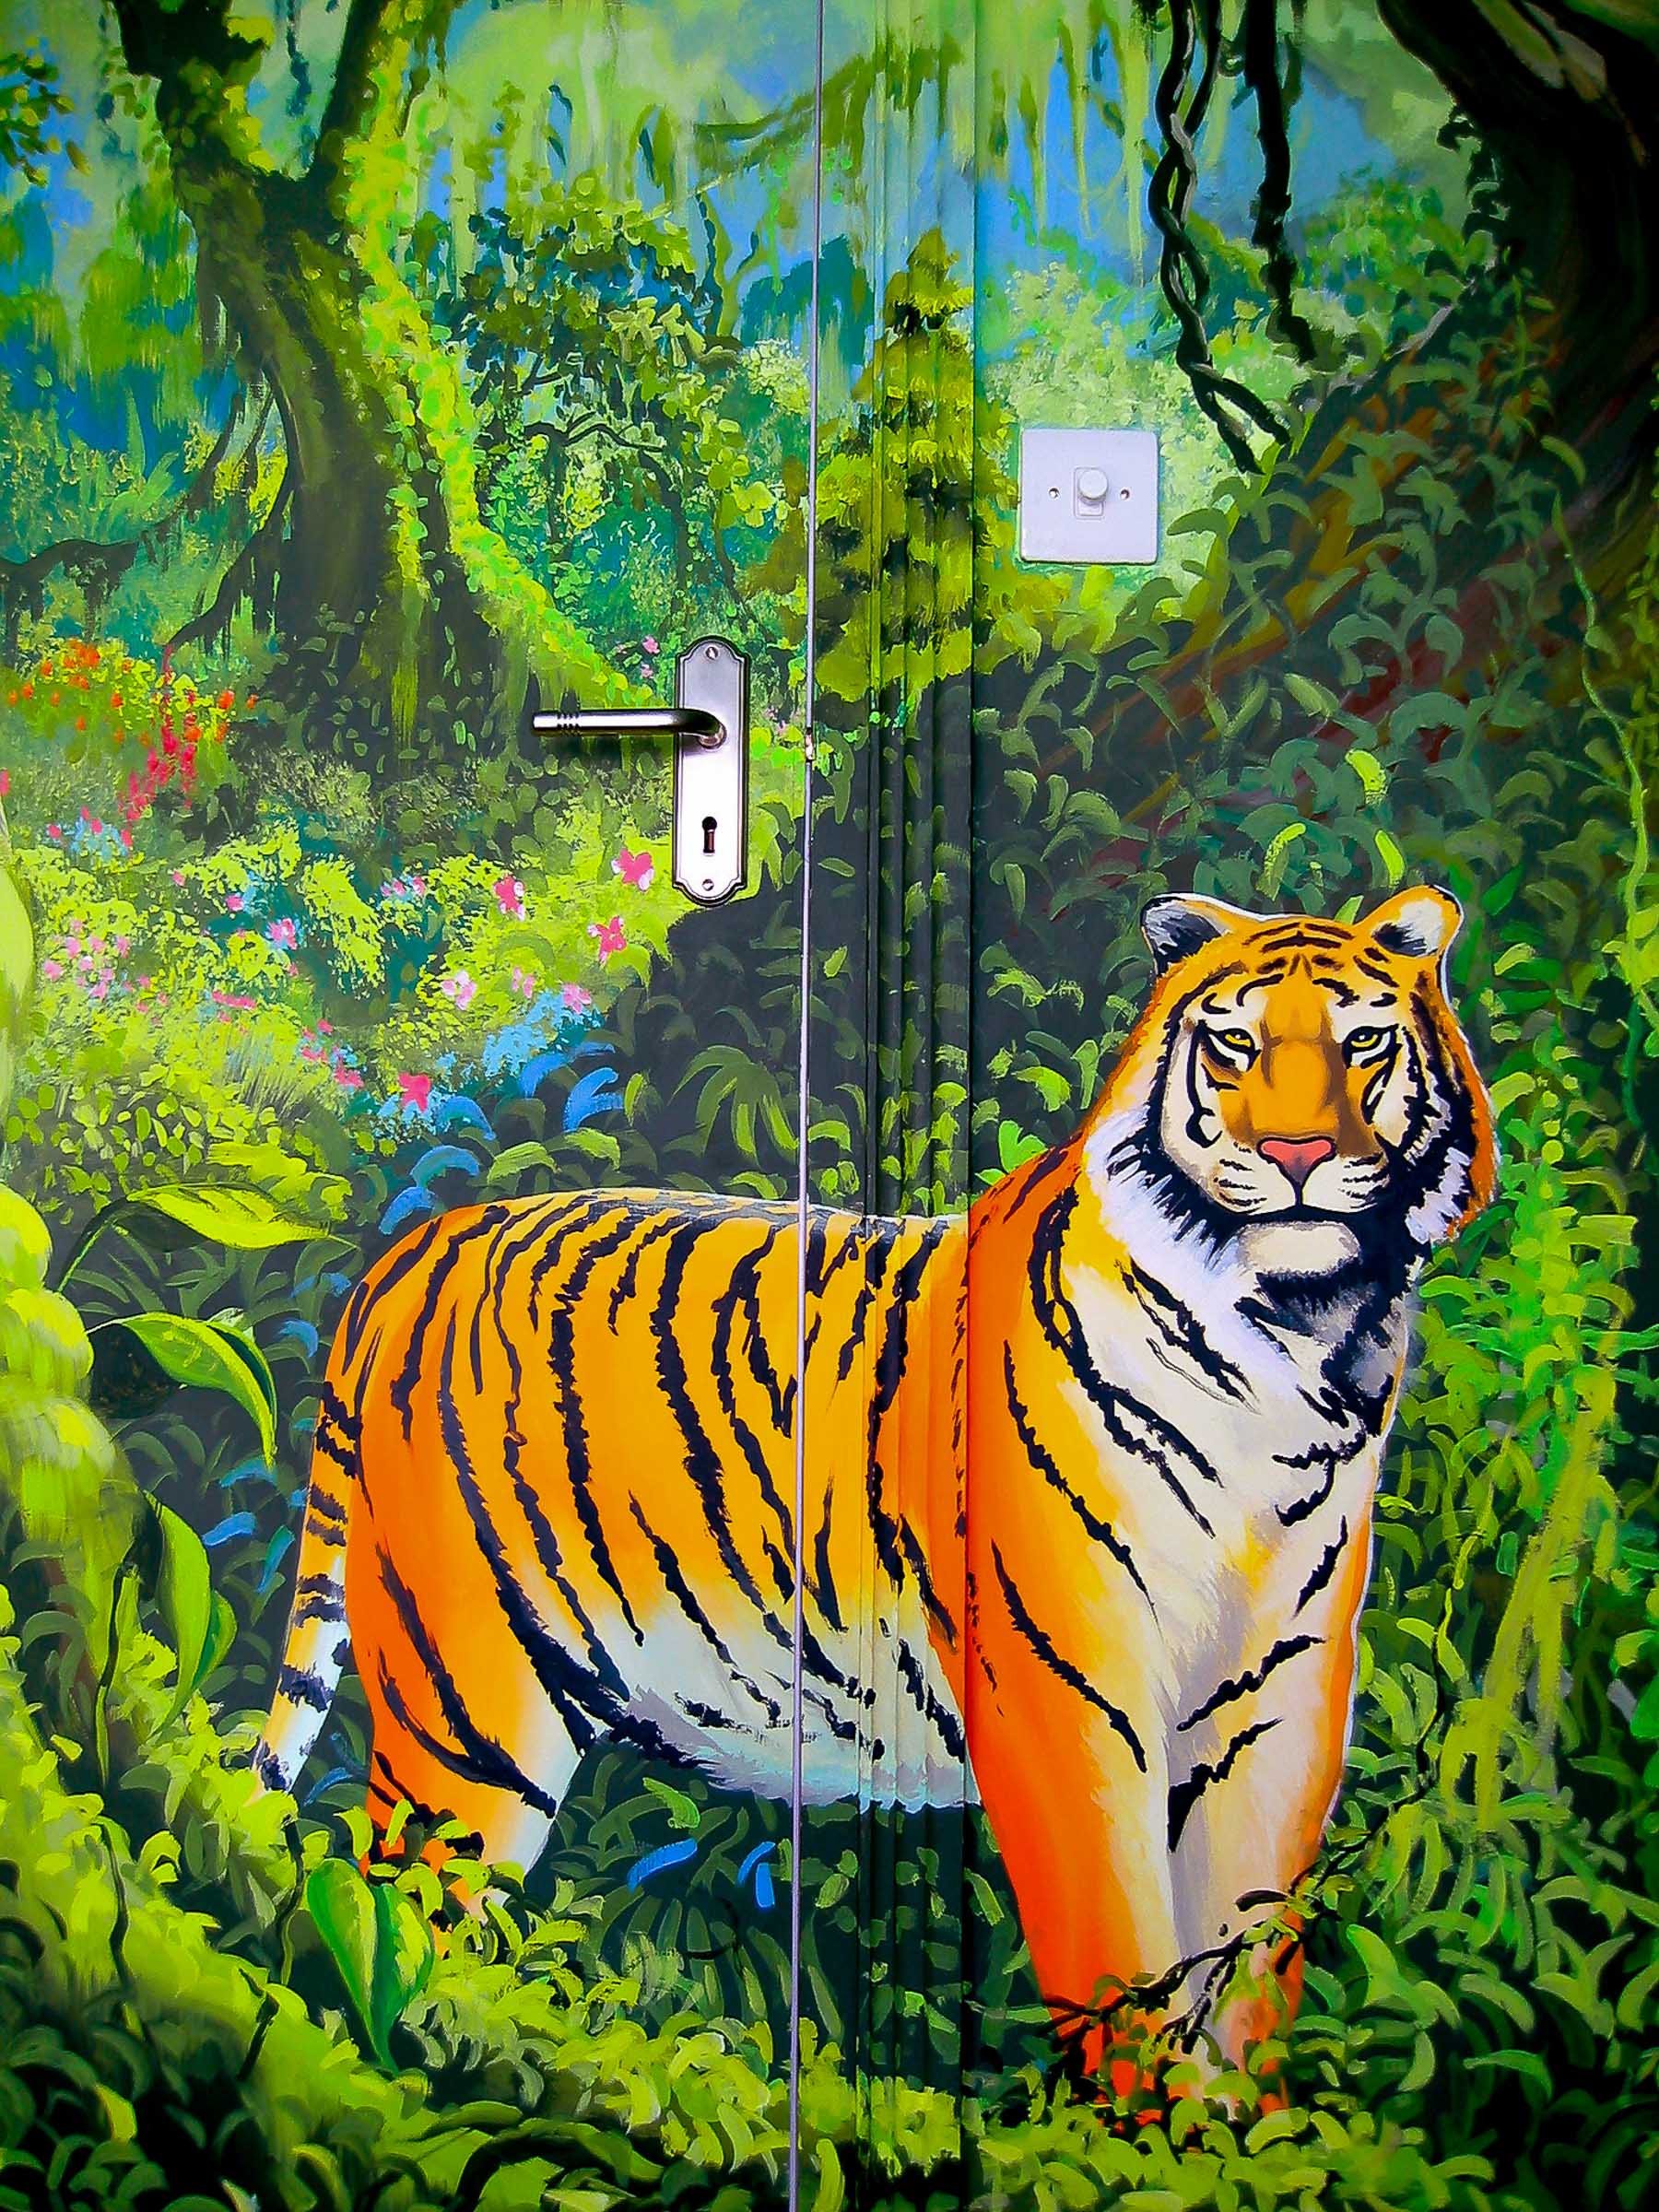 Majestic tiger part of the jungle mural, painted over the door and frame